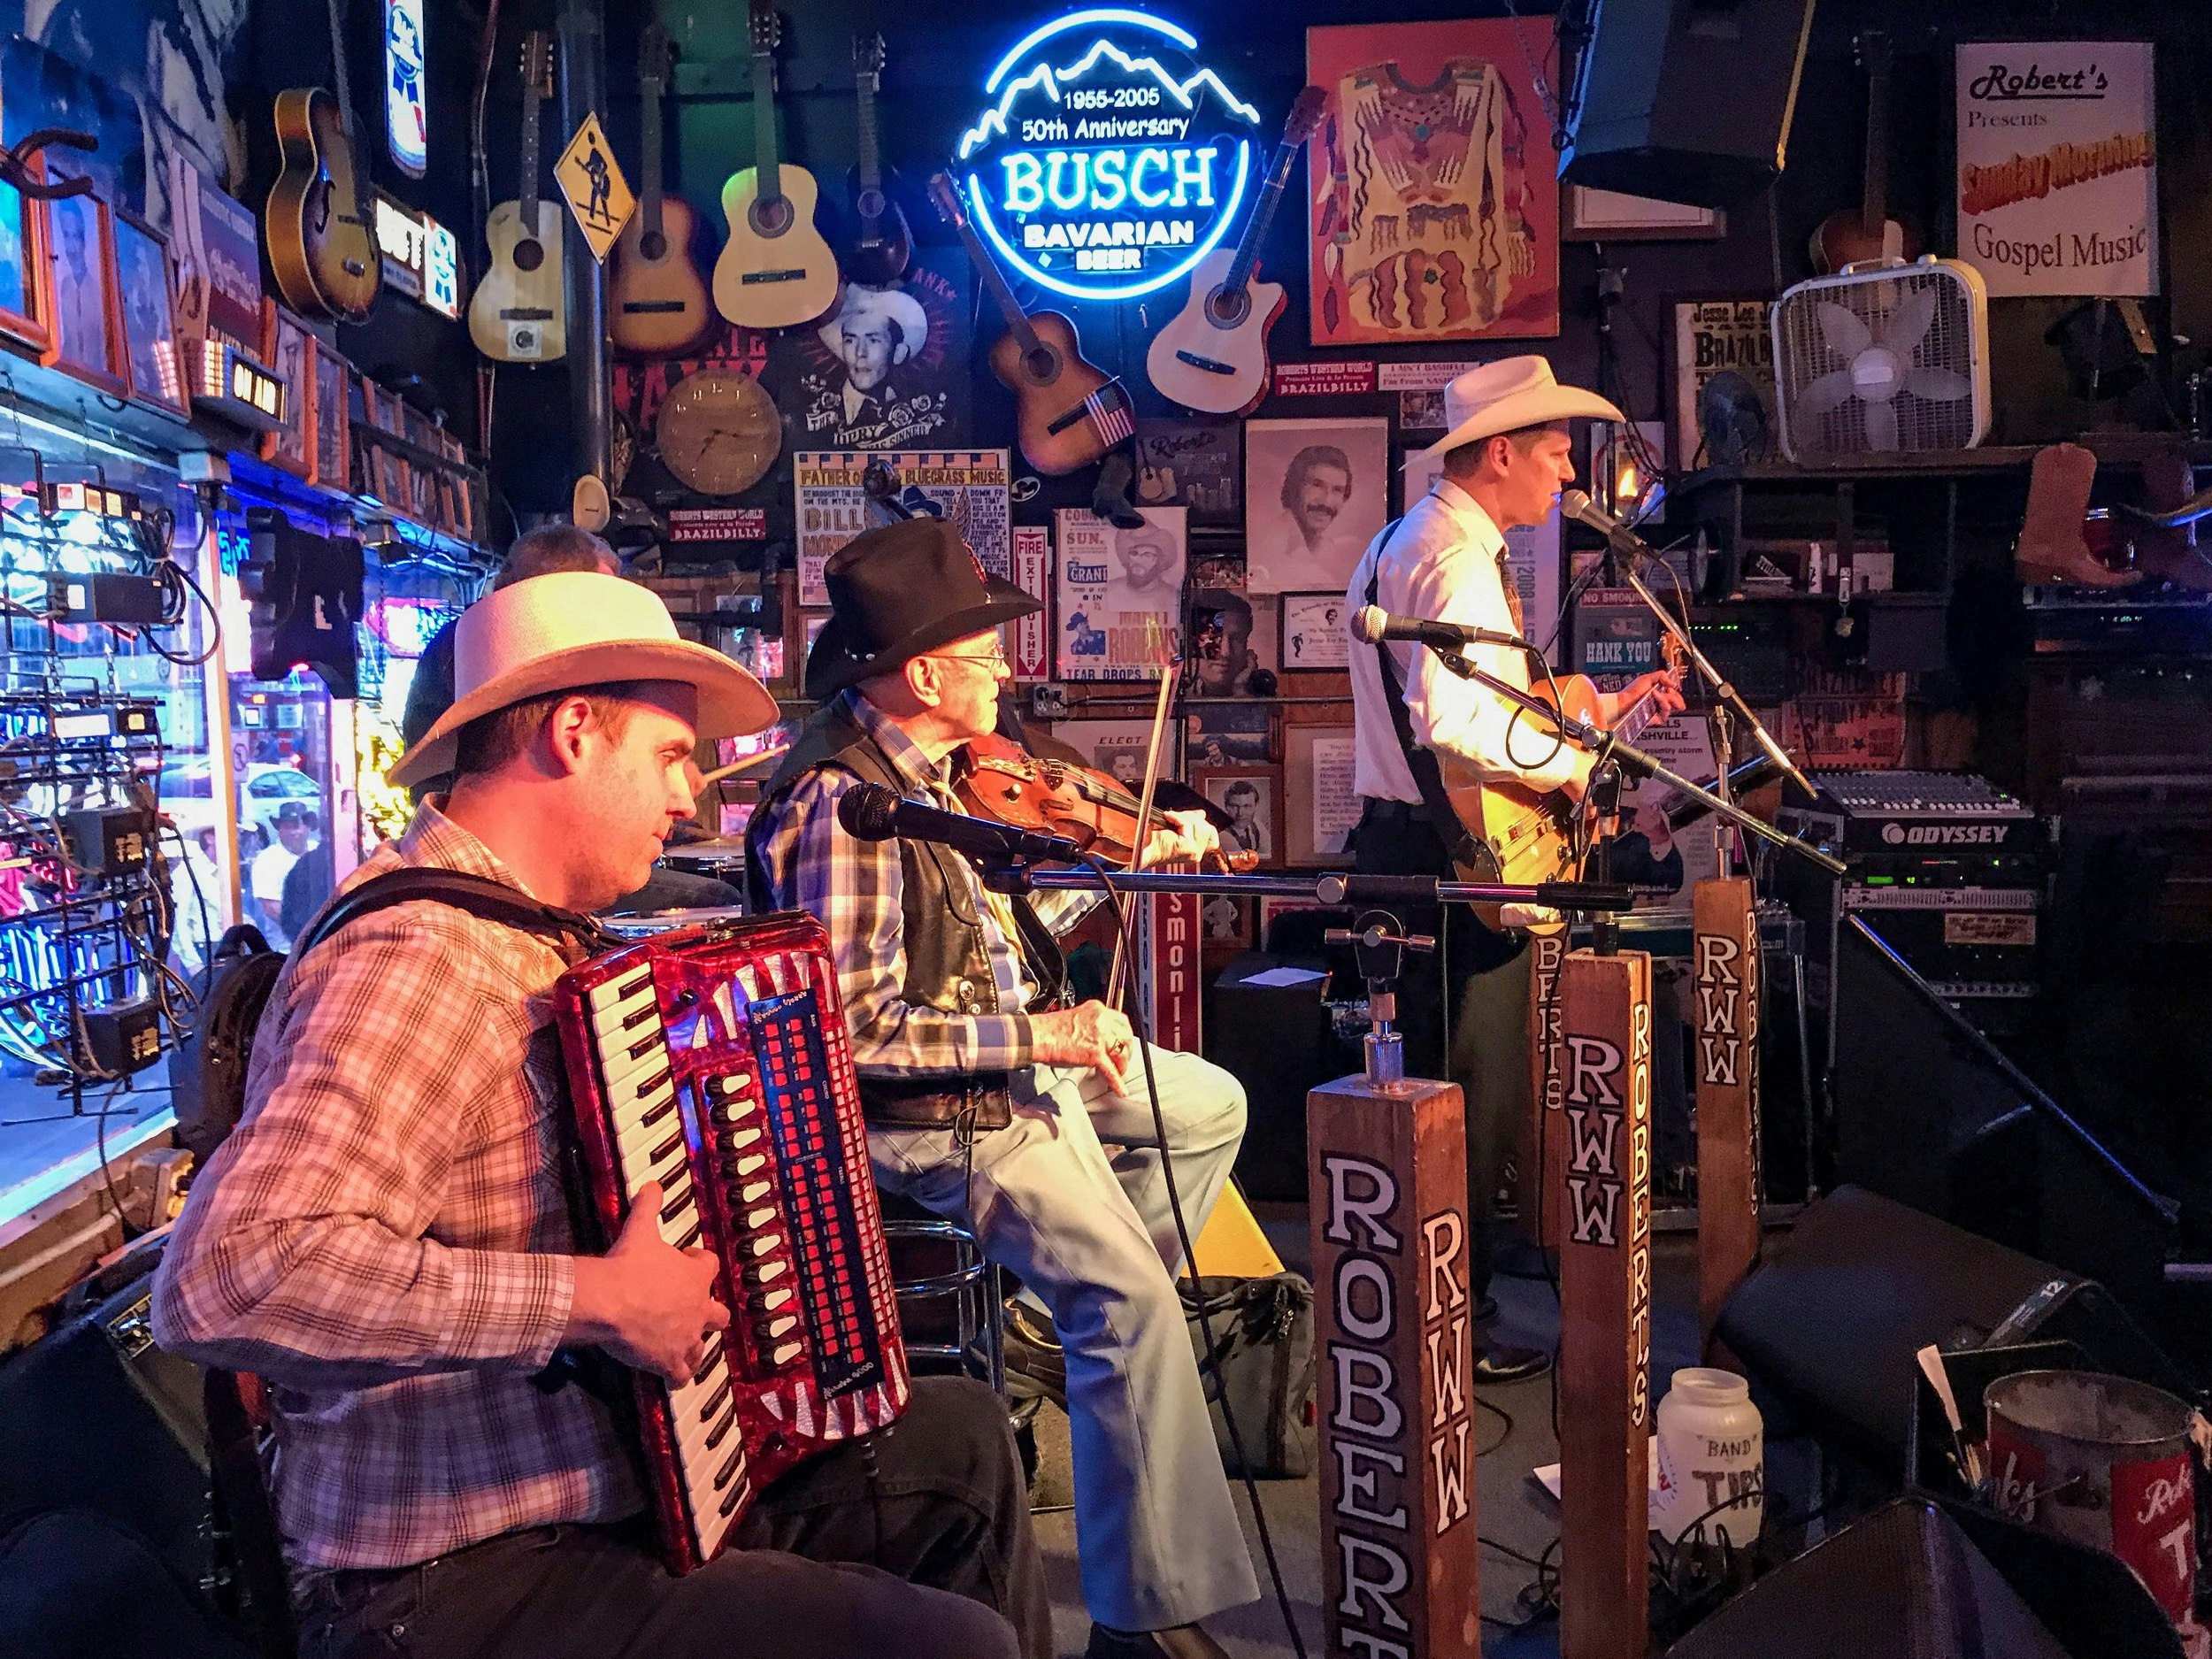 A country band with a fiddle player performs at a honky tonk; Best country music venues in Nashville